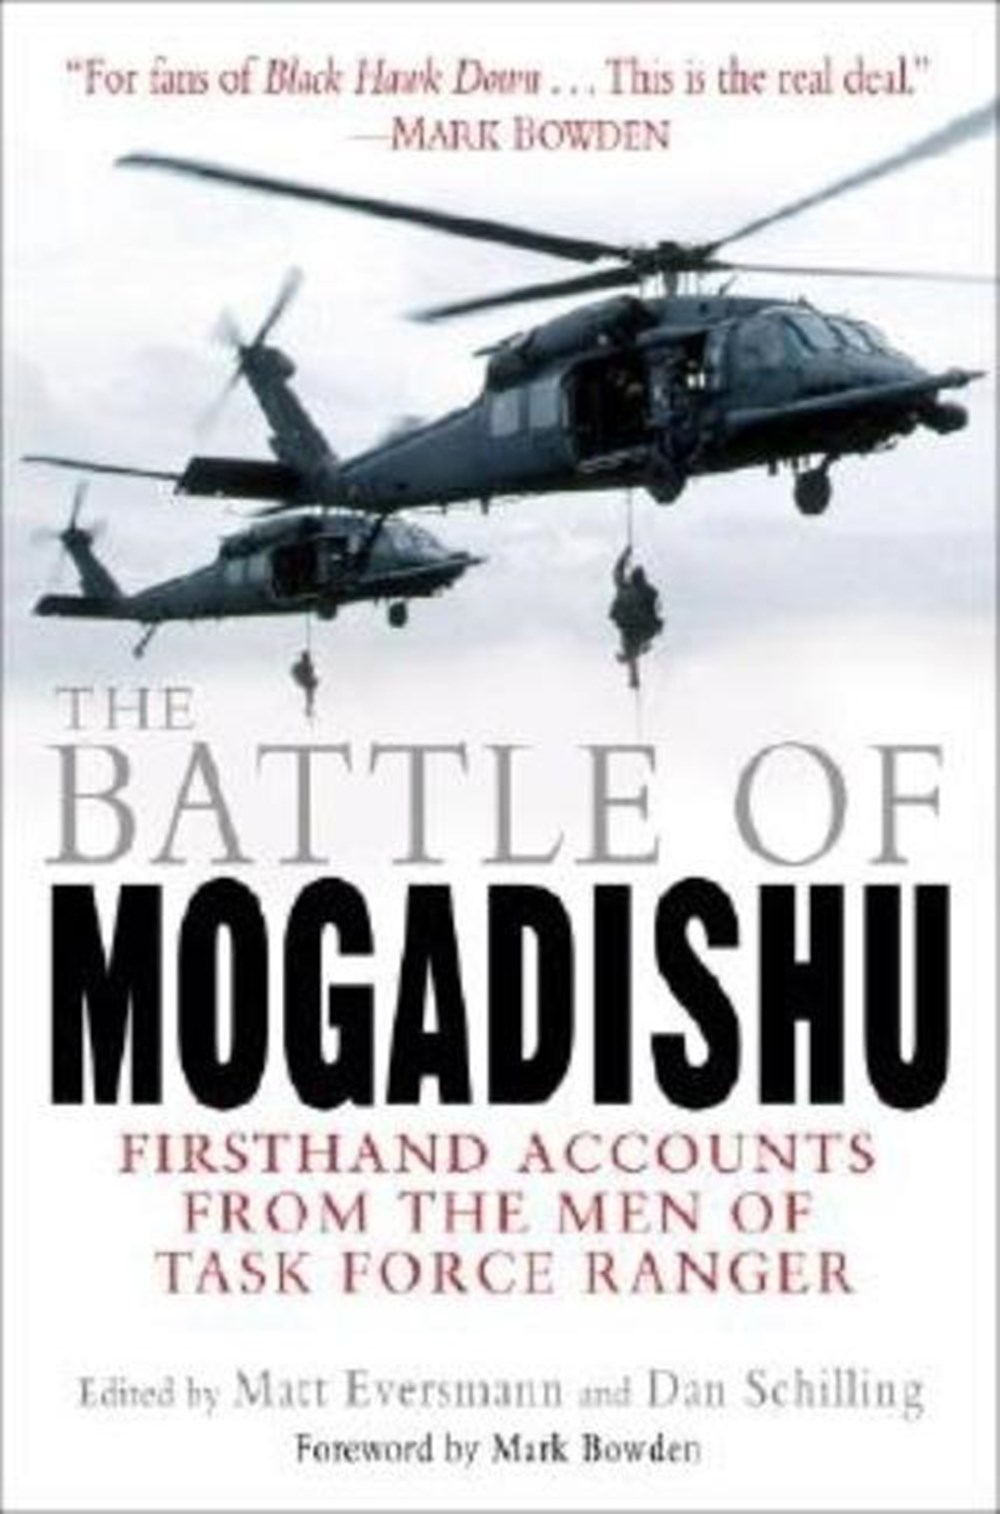 Battle of Mogadishu: Firsthand Accounts from the Men of Task Force Ranger